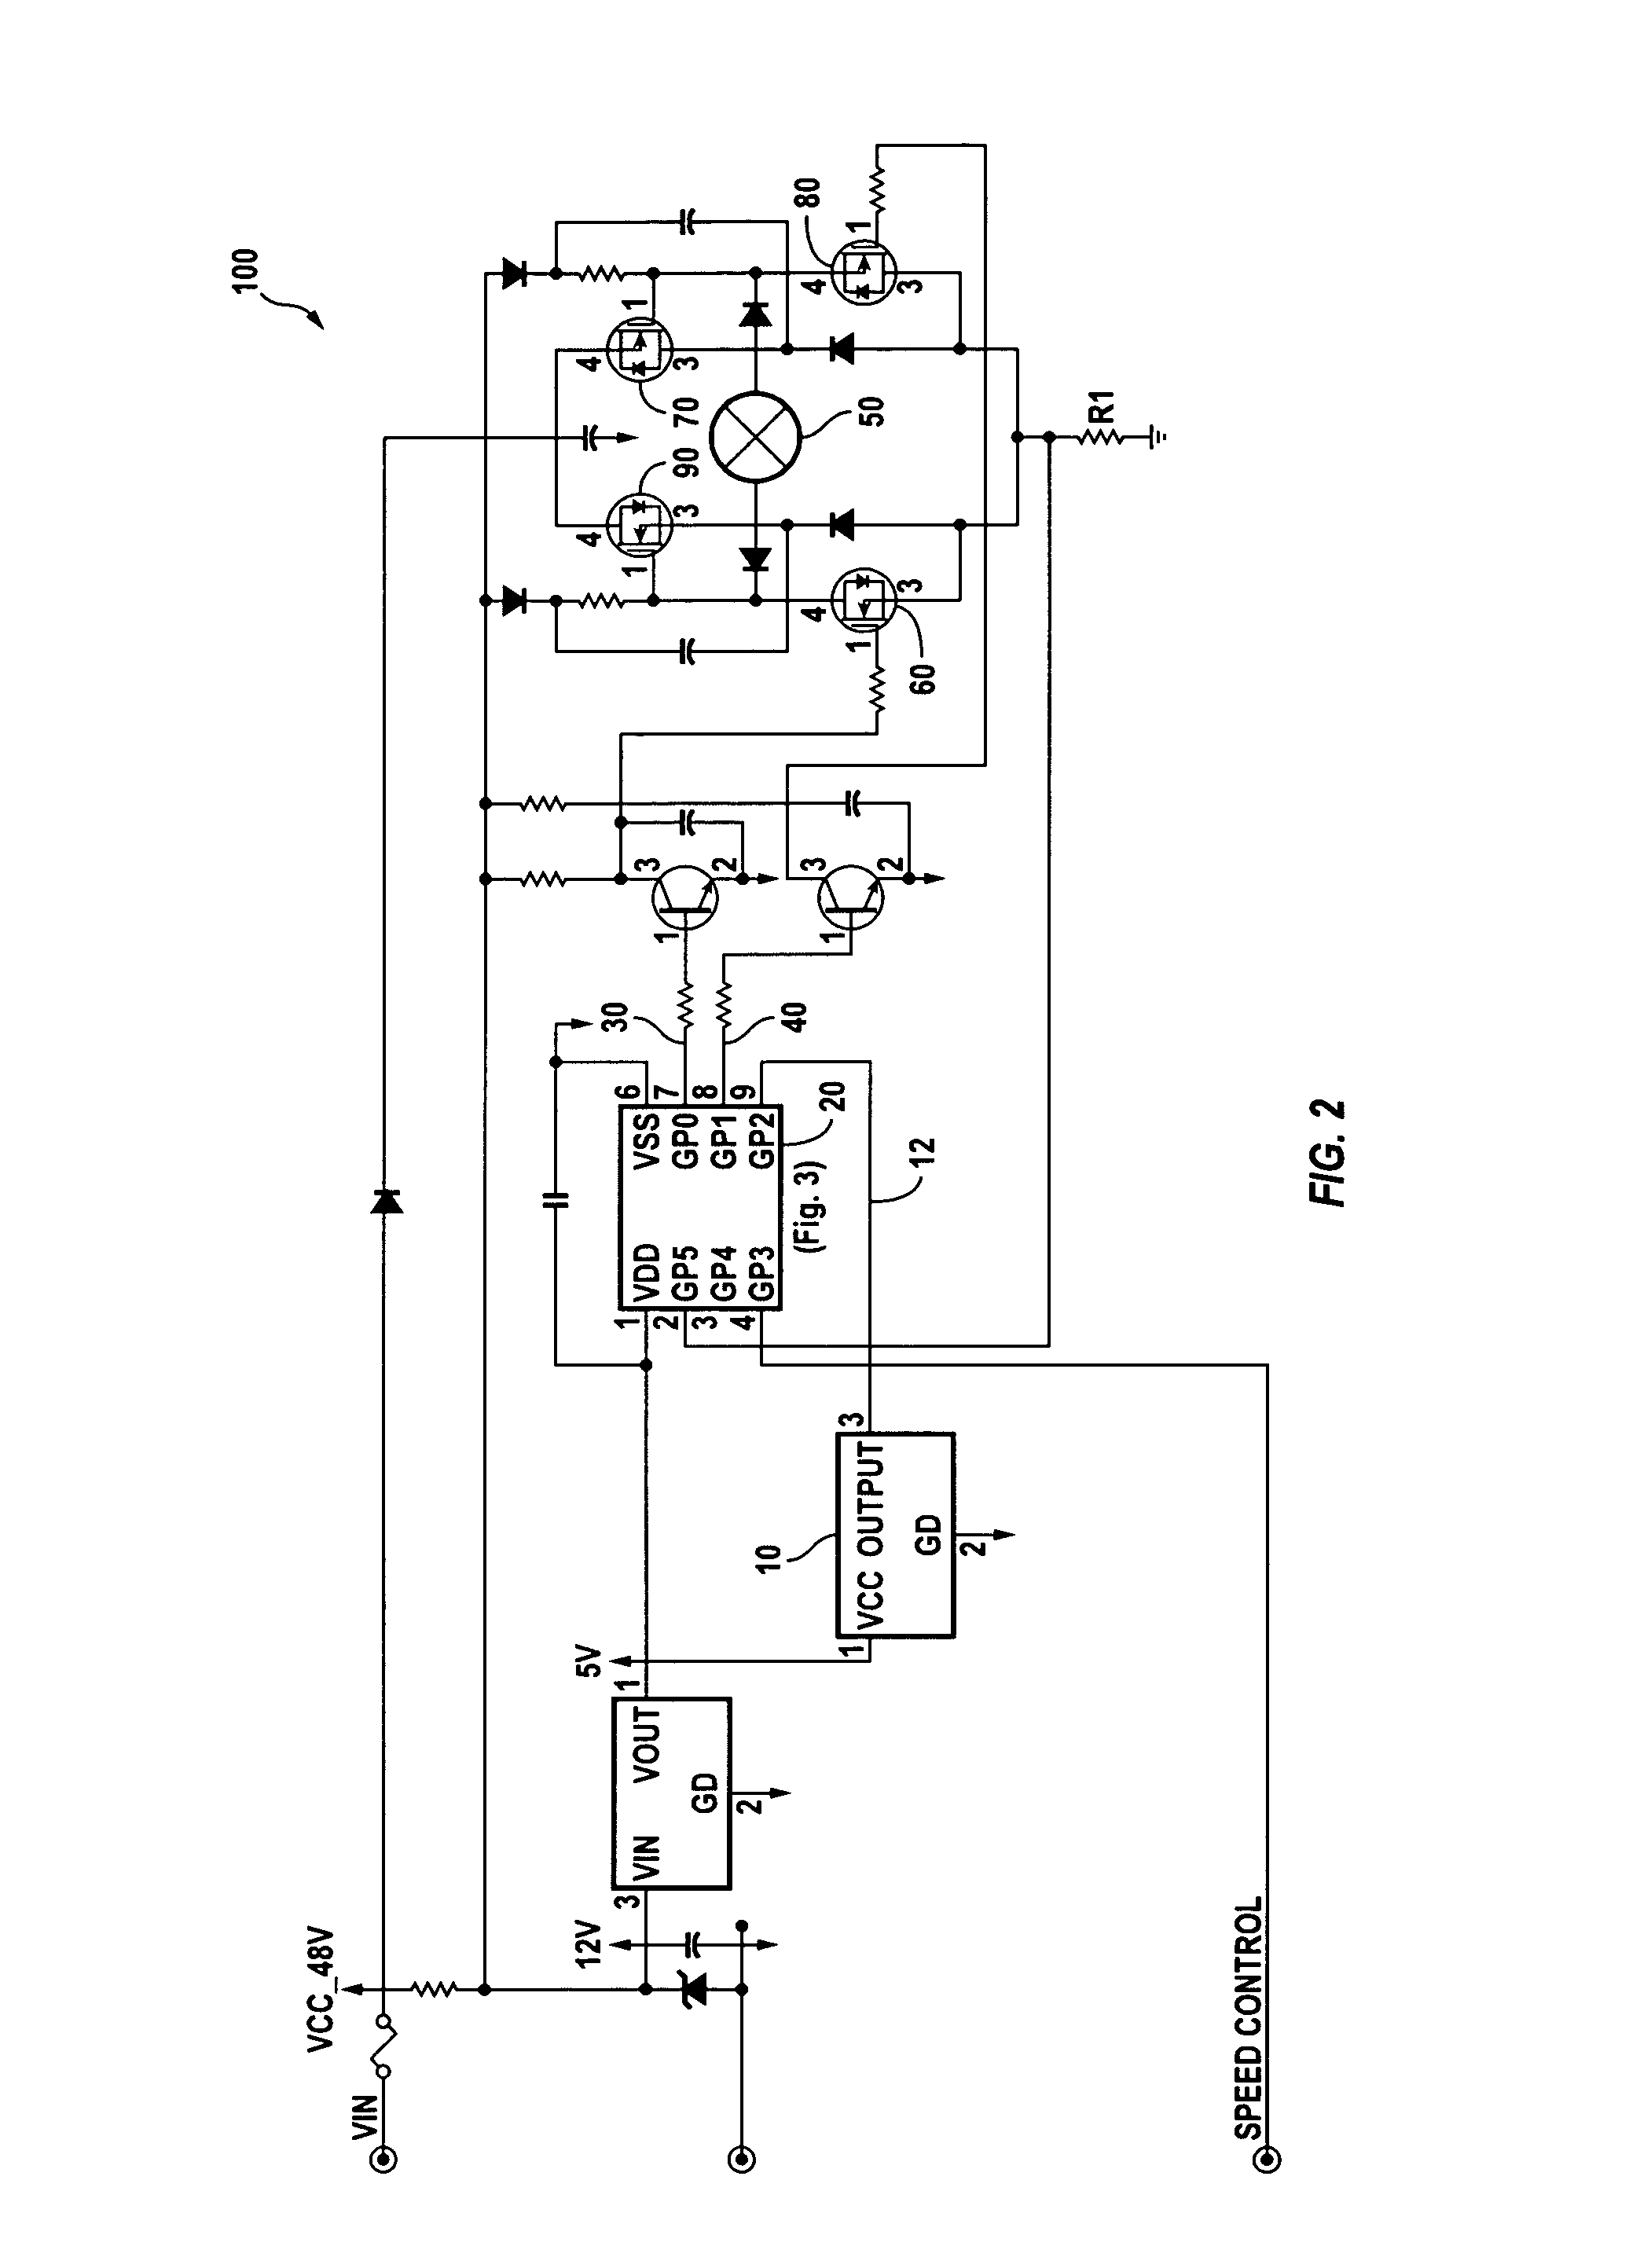 Motor current shaping